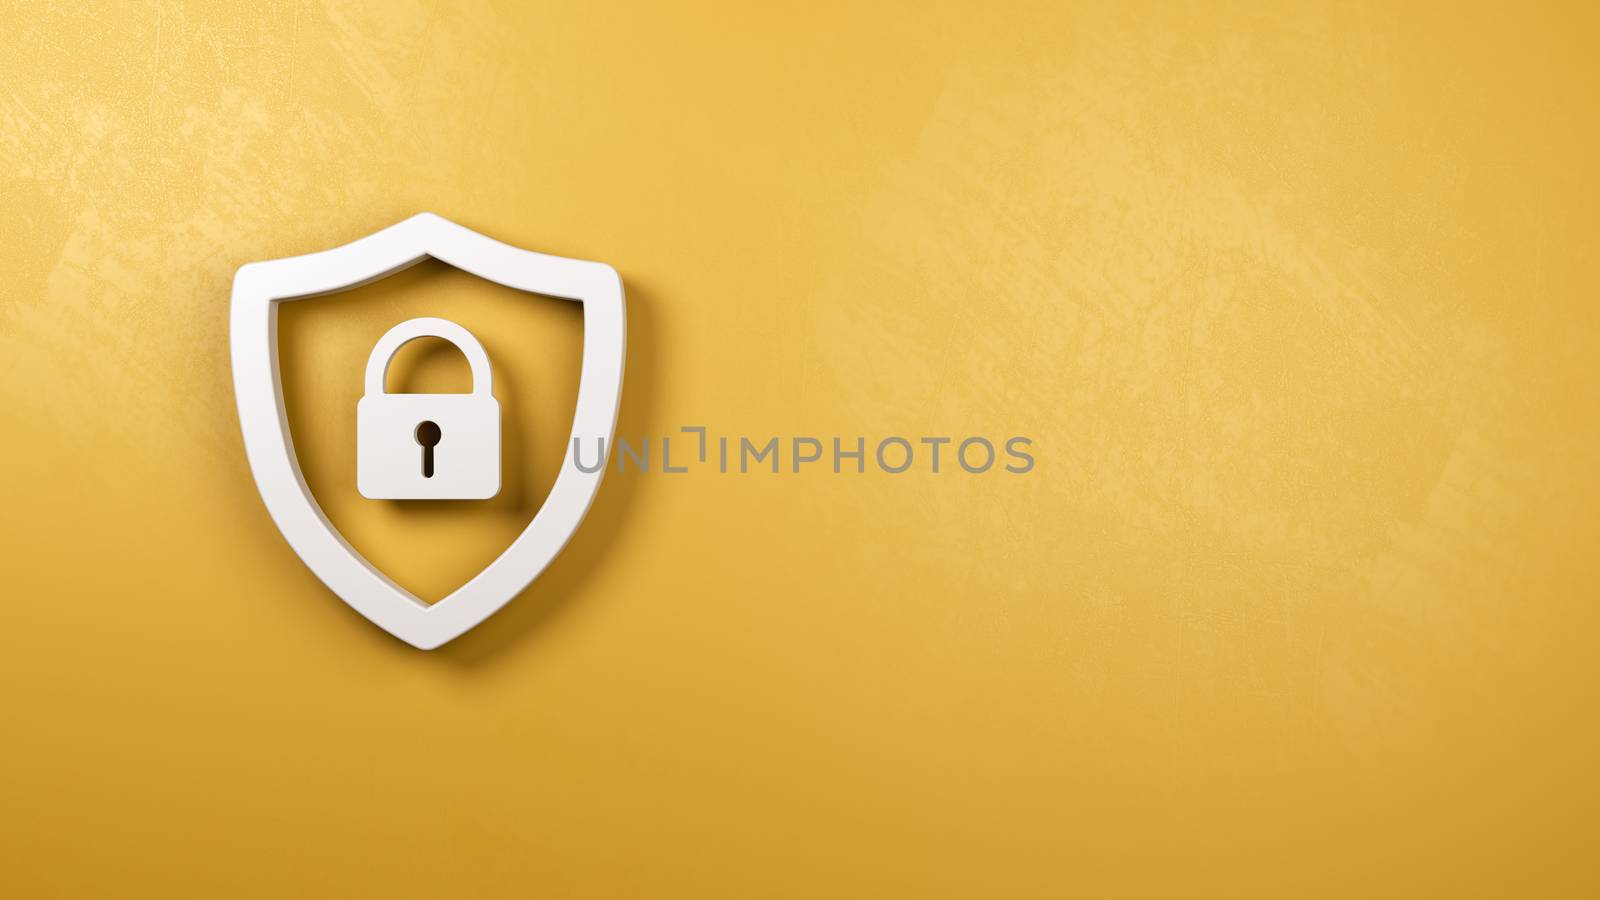 White Shield 3D Symbol Shape with Padlock on a Yellow Plastered Wall with Copy Space 3D Illustration